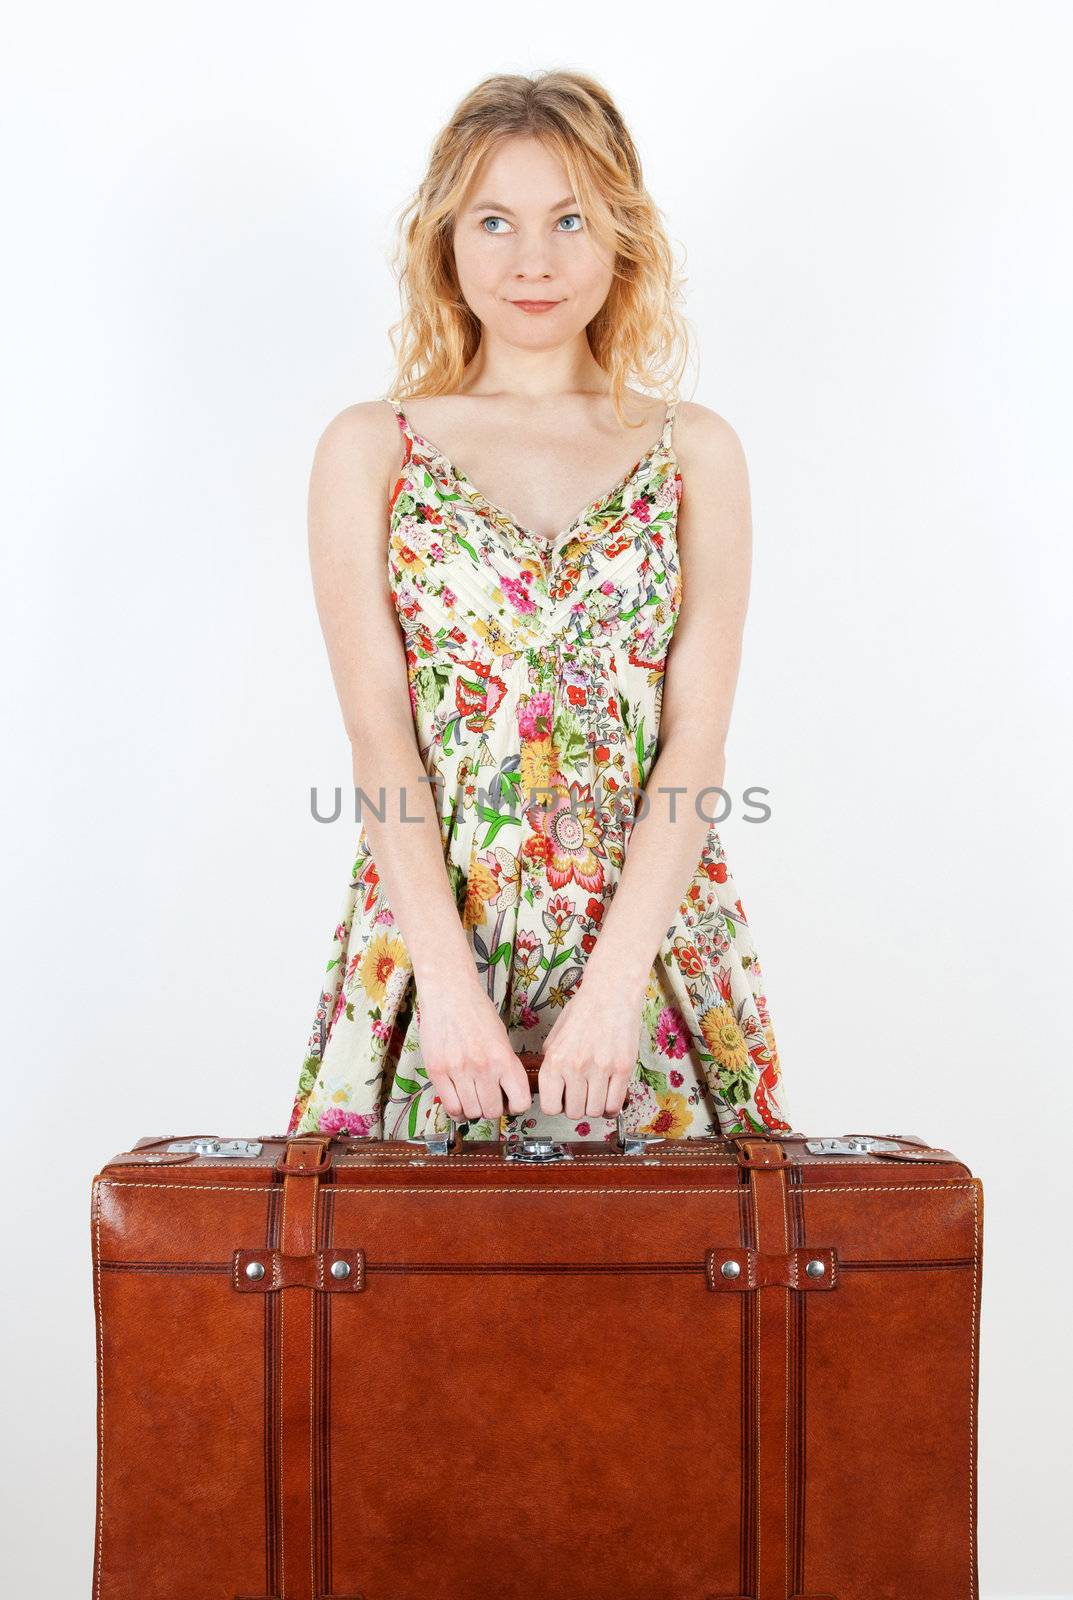 Girl wearing summer dress holds a vintage suitcase, anticipating travel.